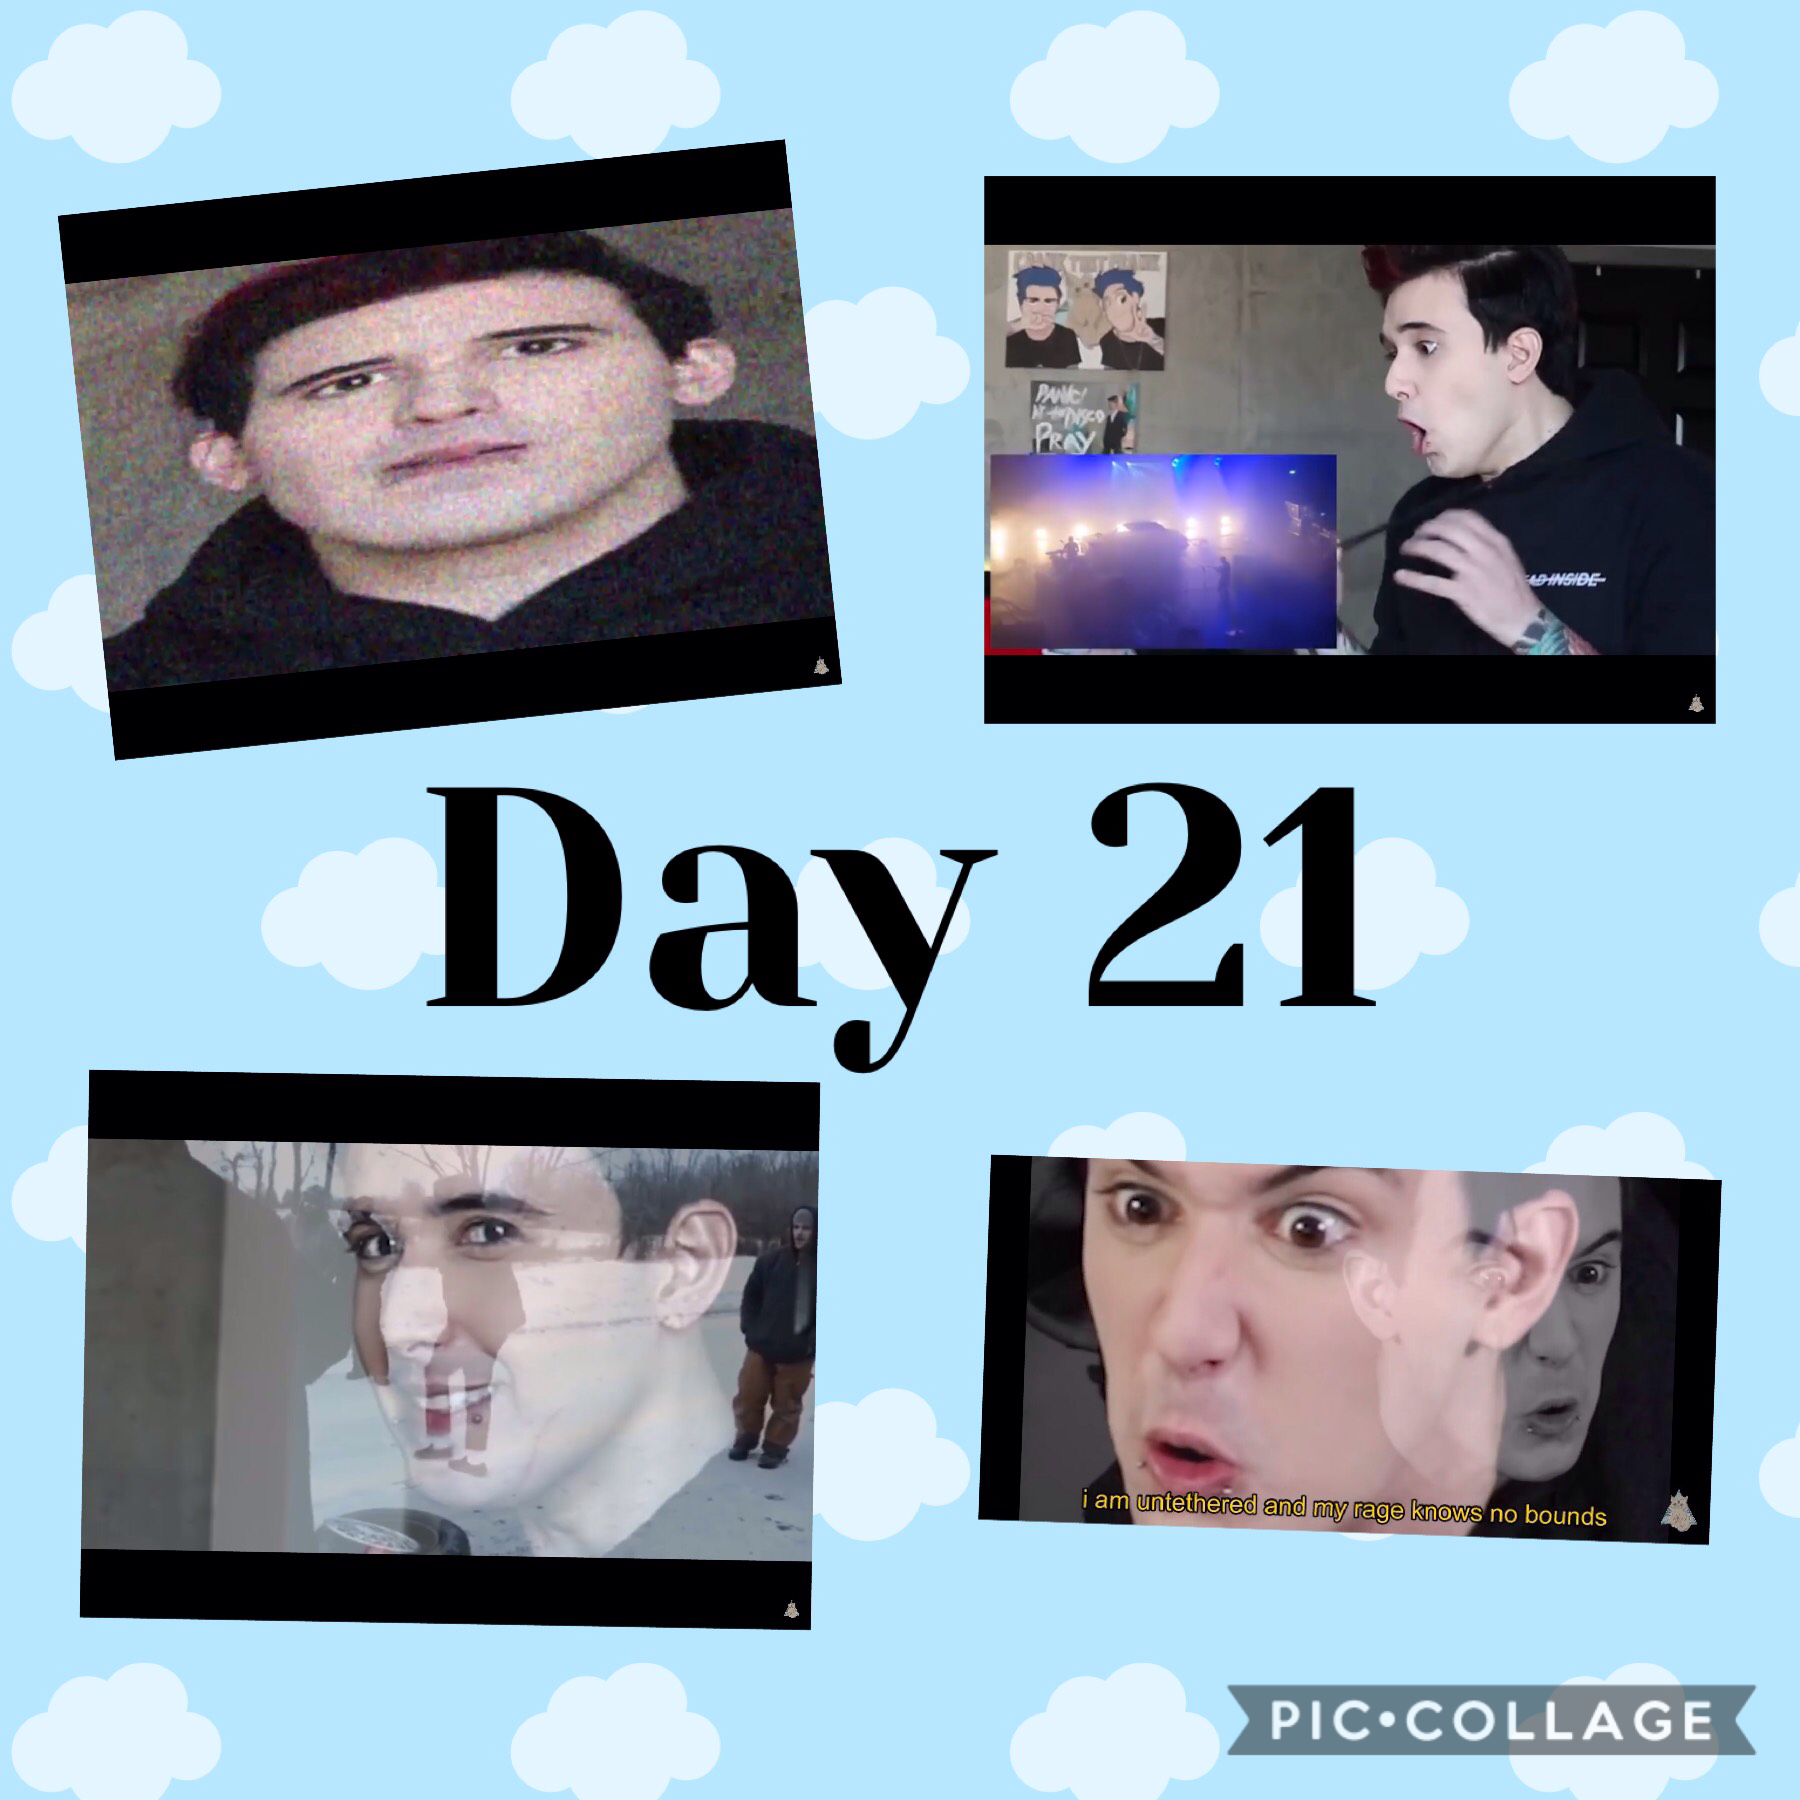 Day 21 5/24/19